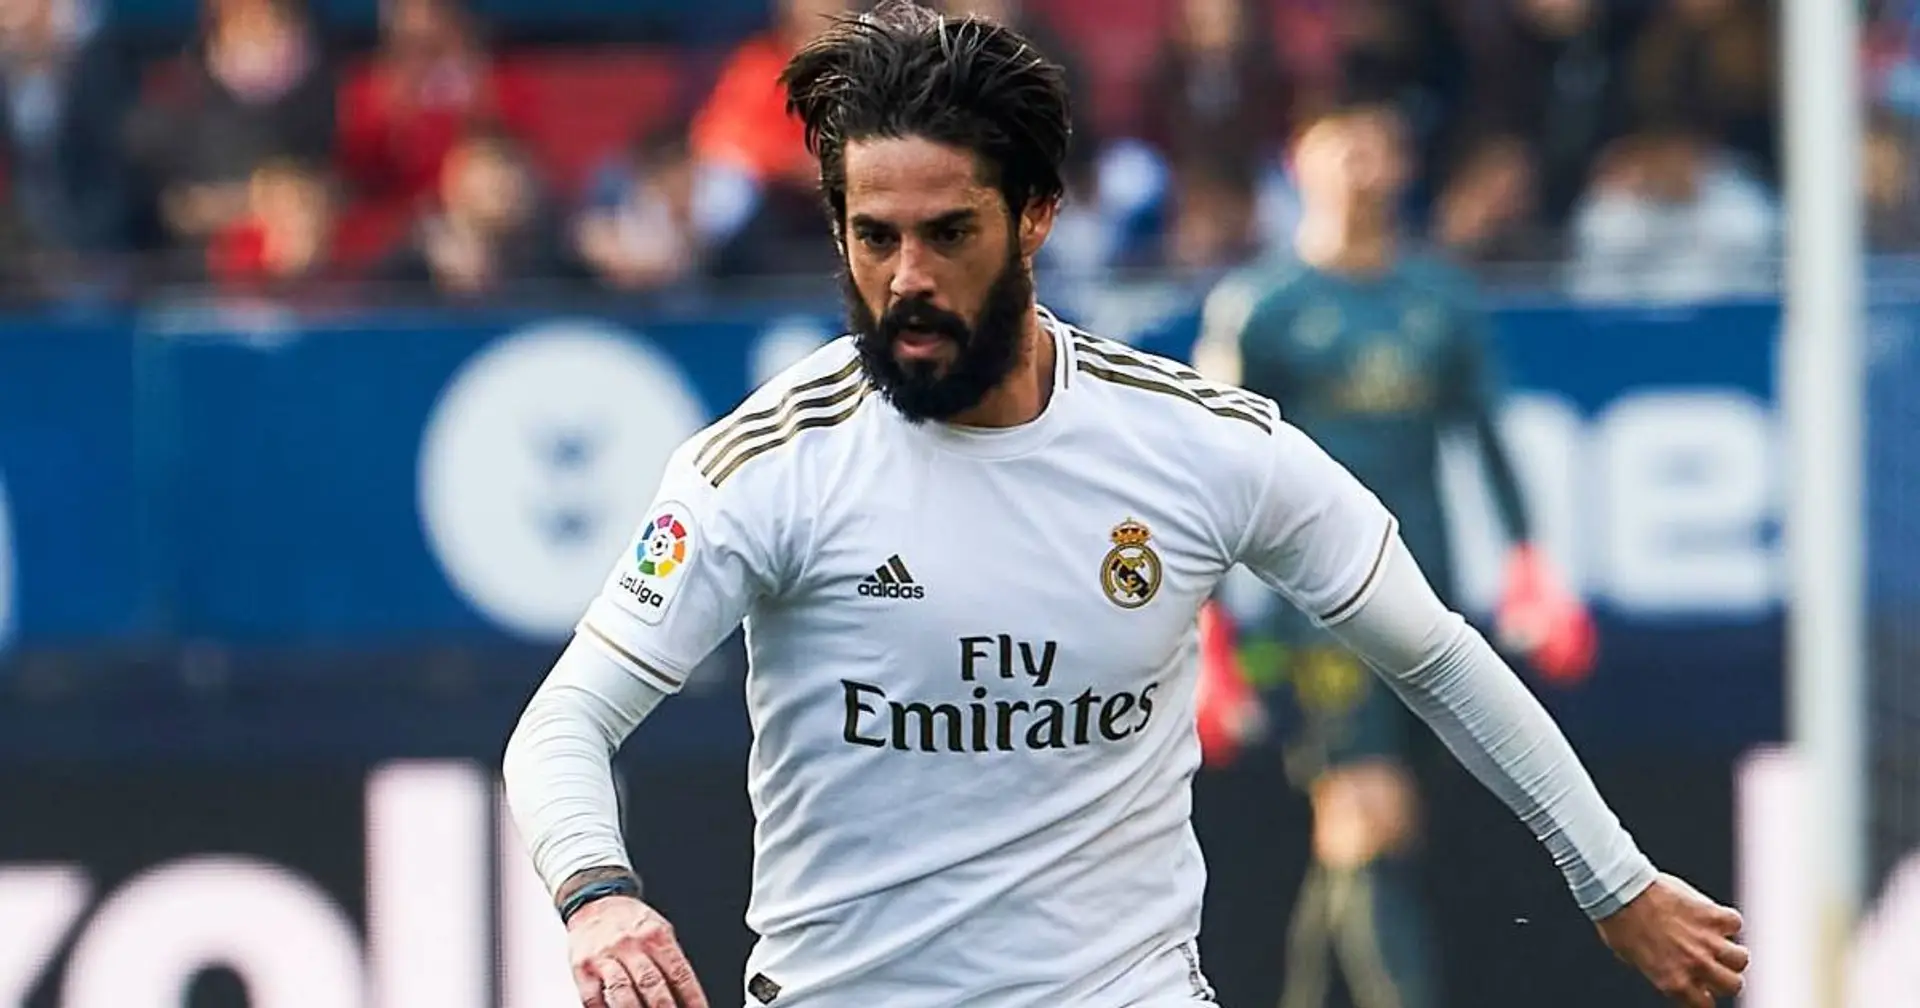 'Humiliated' Isco asks for January transfer but there are no offers (reliability: 3 stars)